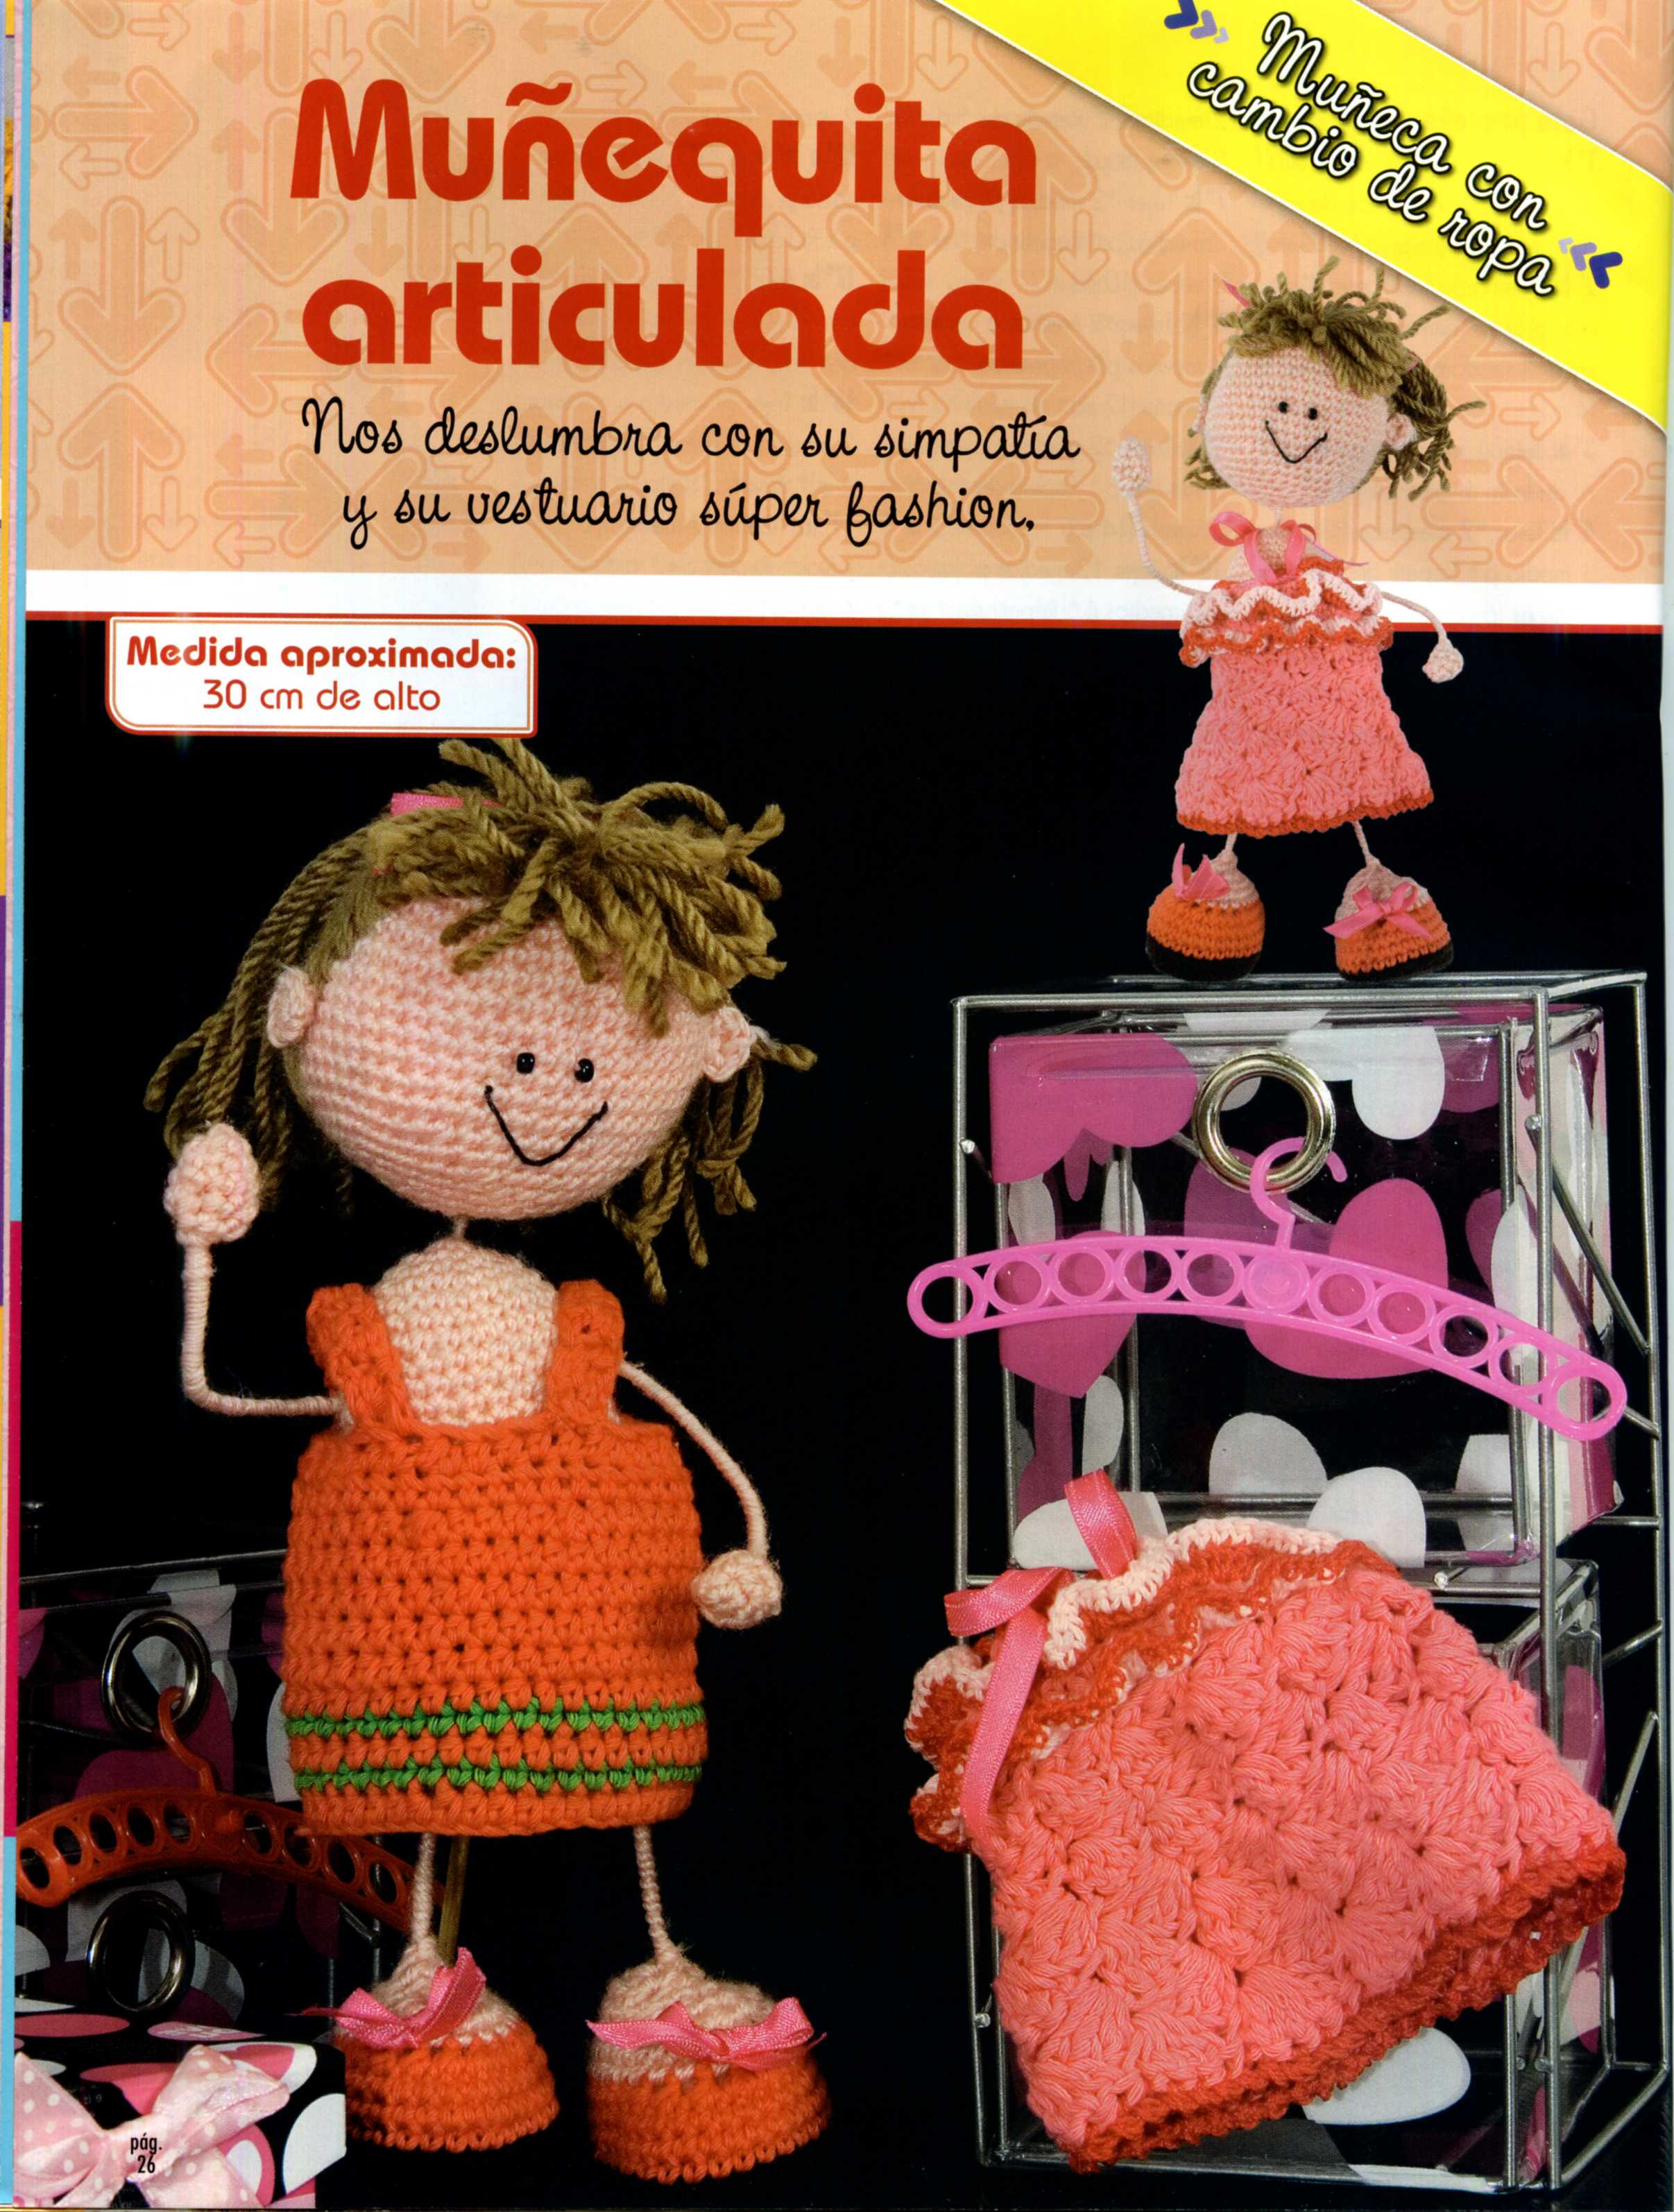 Nice doll with two dresses amigurumi pattern (1)